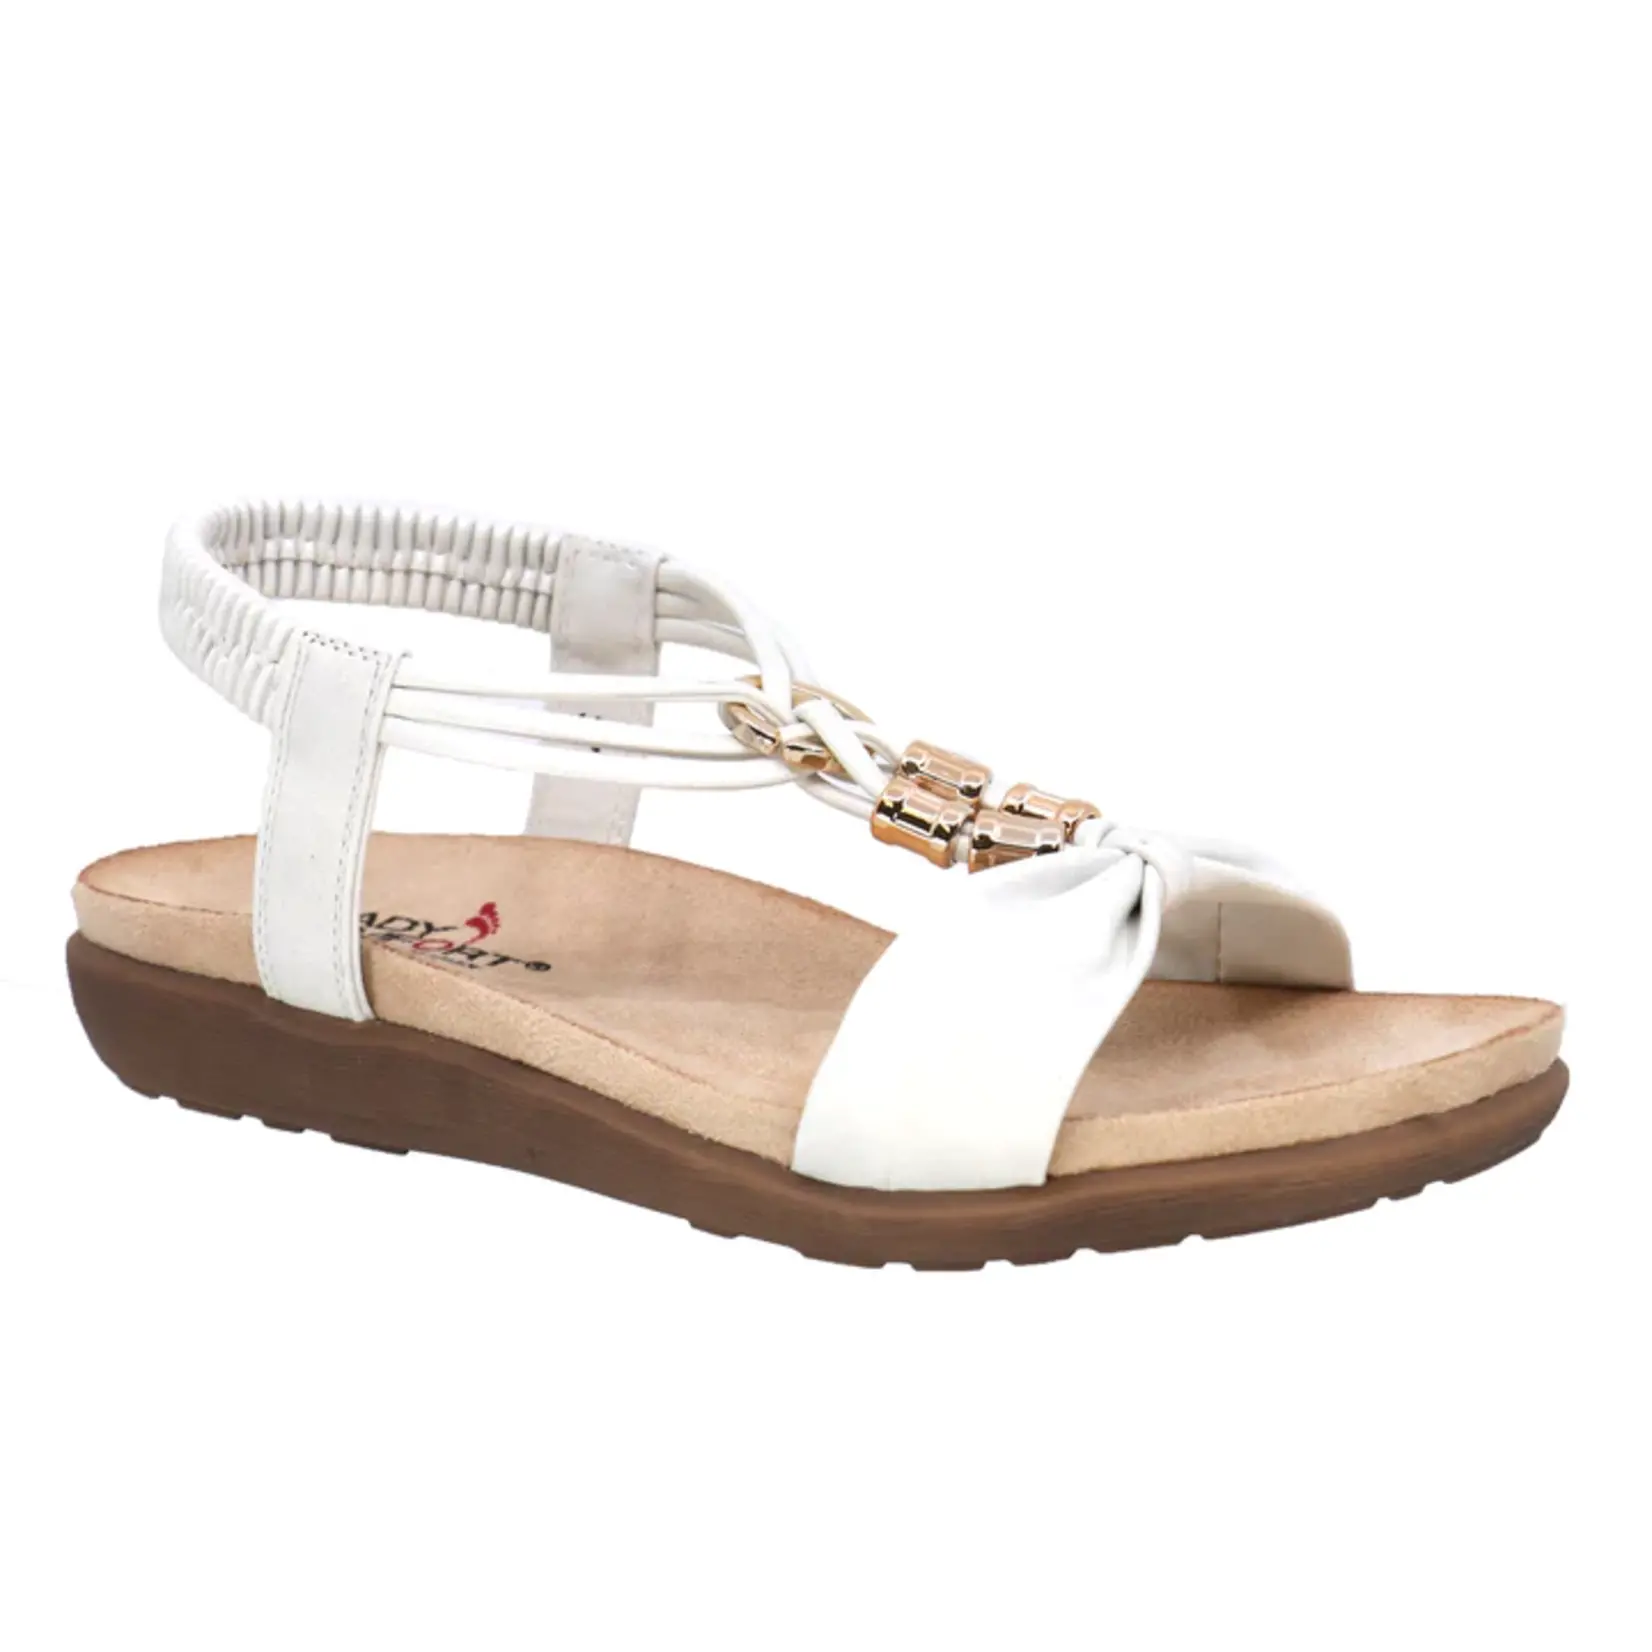 Lady Comfort Lady Comfort ladies flat sandal with wrap around ankle strap, sandals, footwear